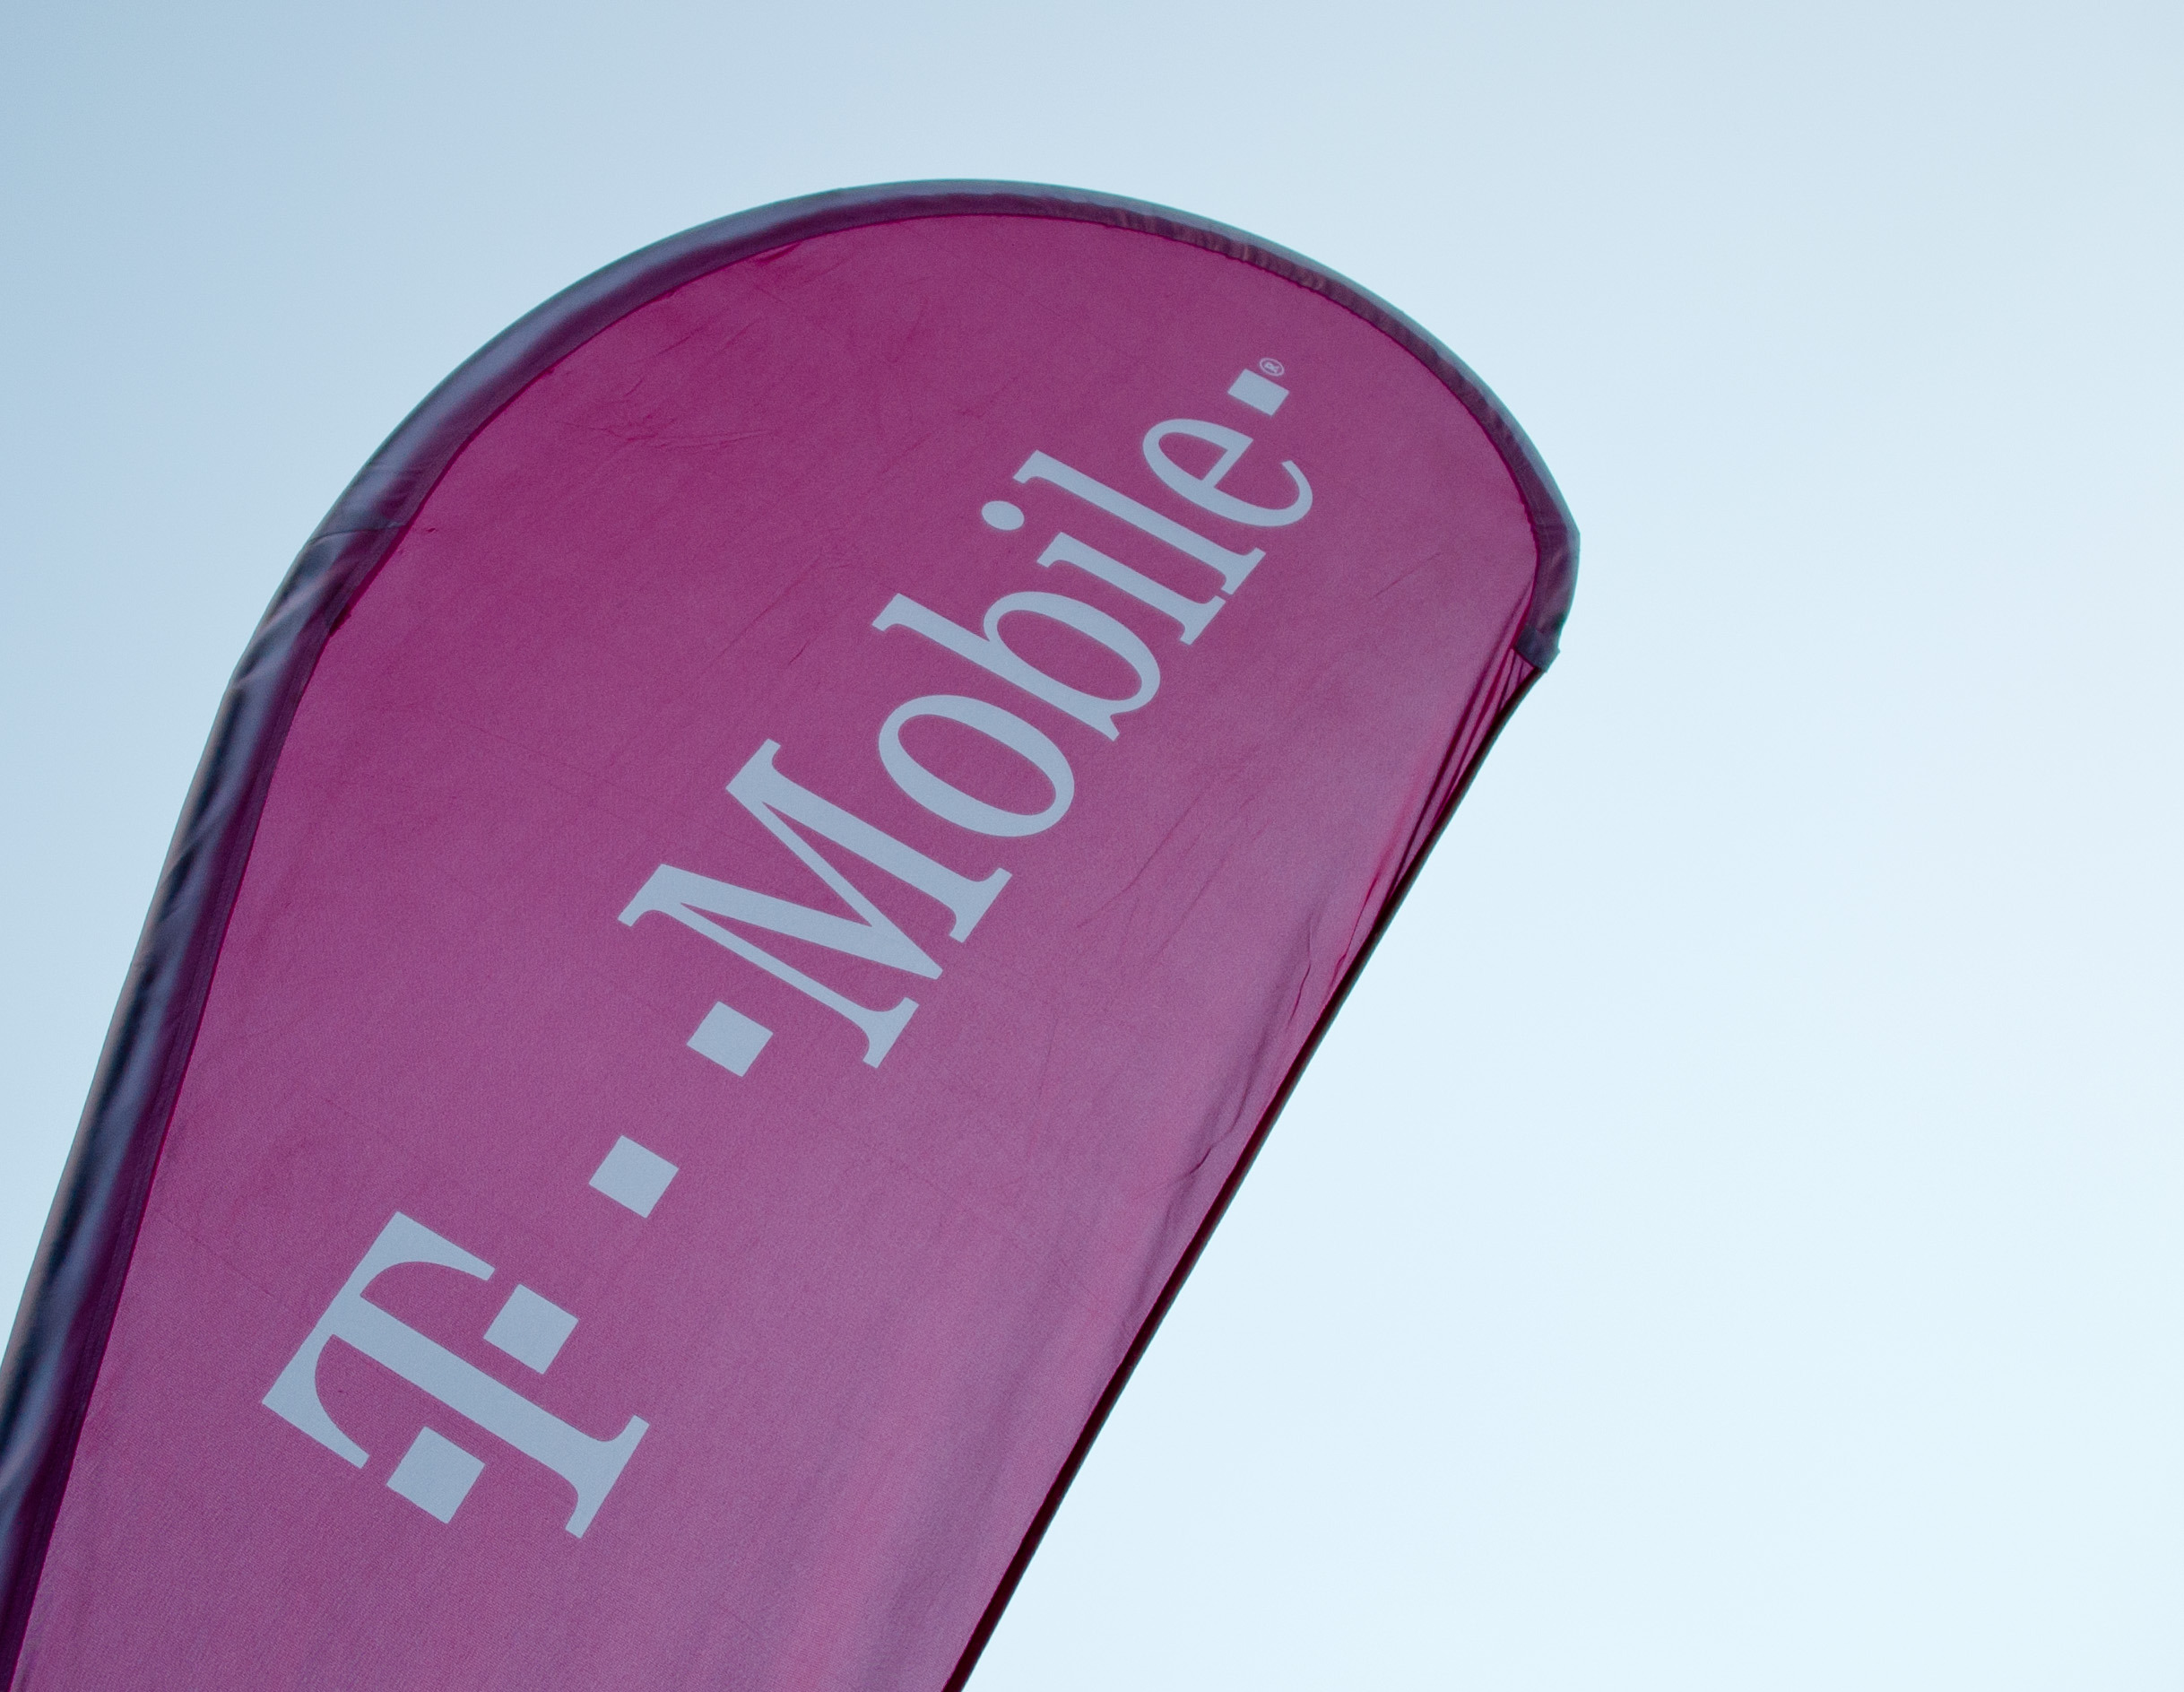 A T-Mobile banner in New York City on Sep. 27, 2014.